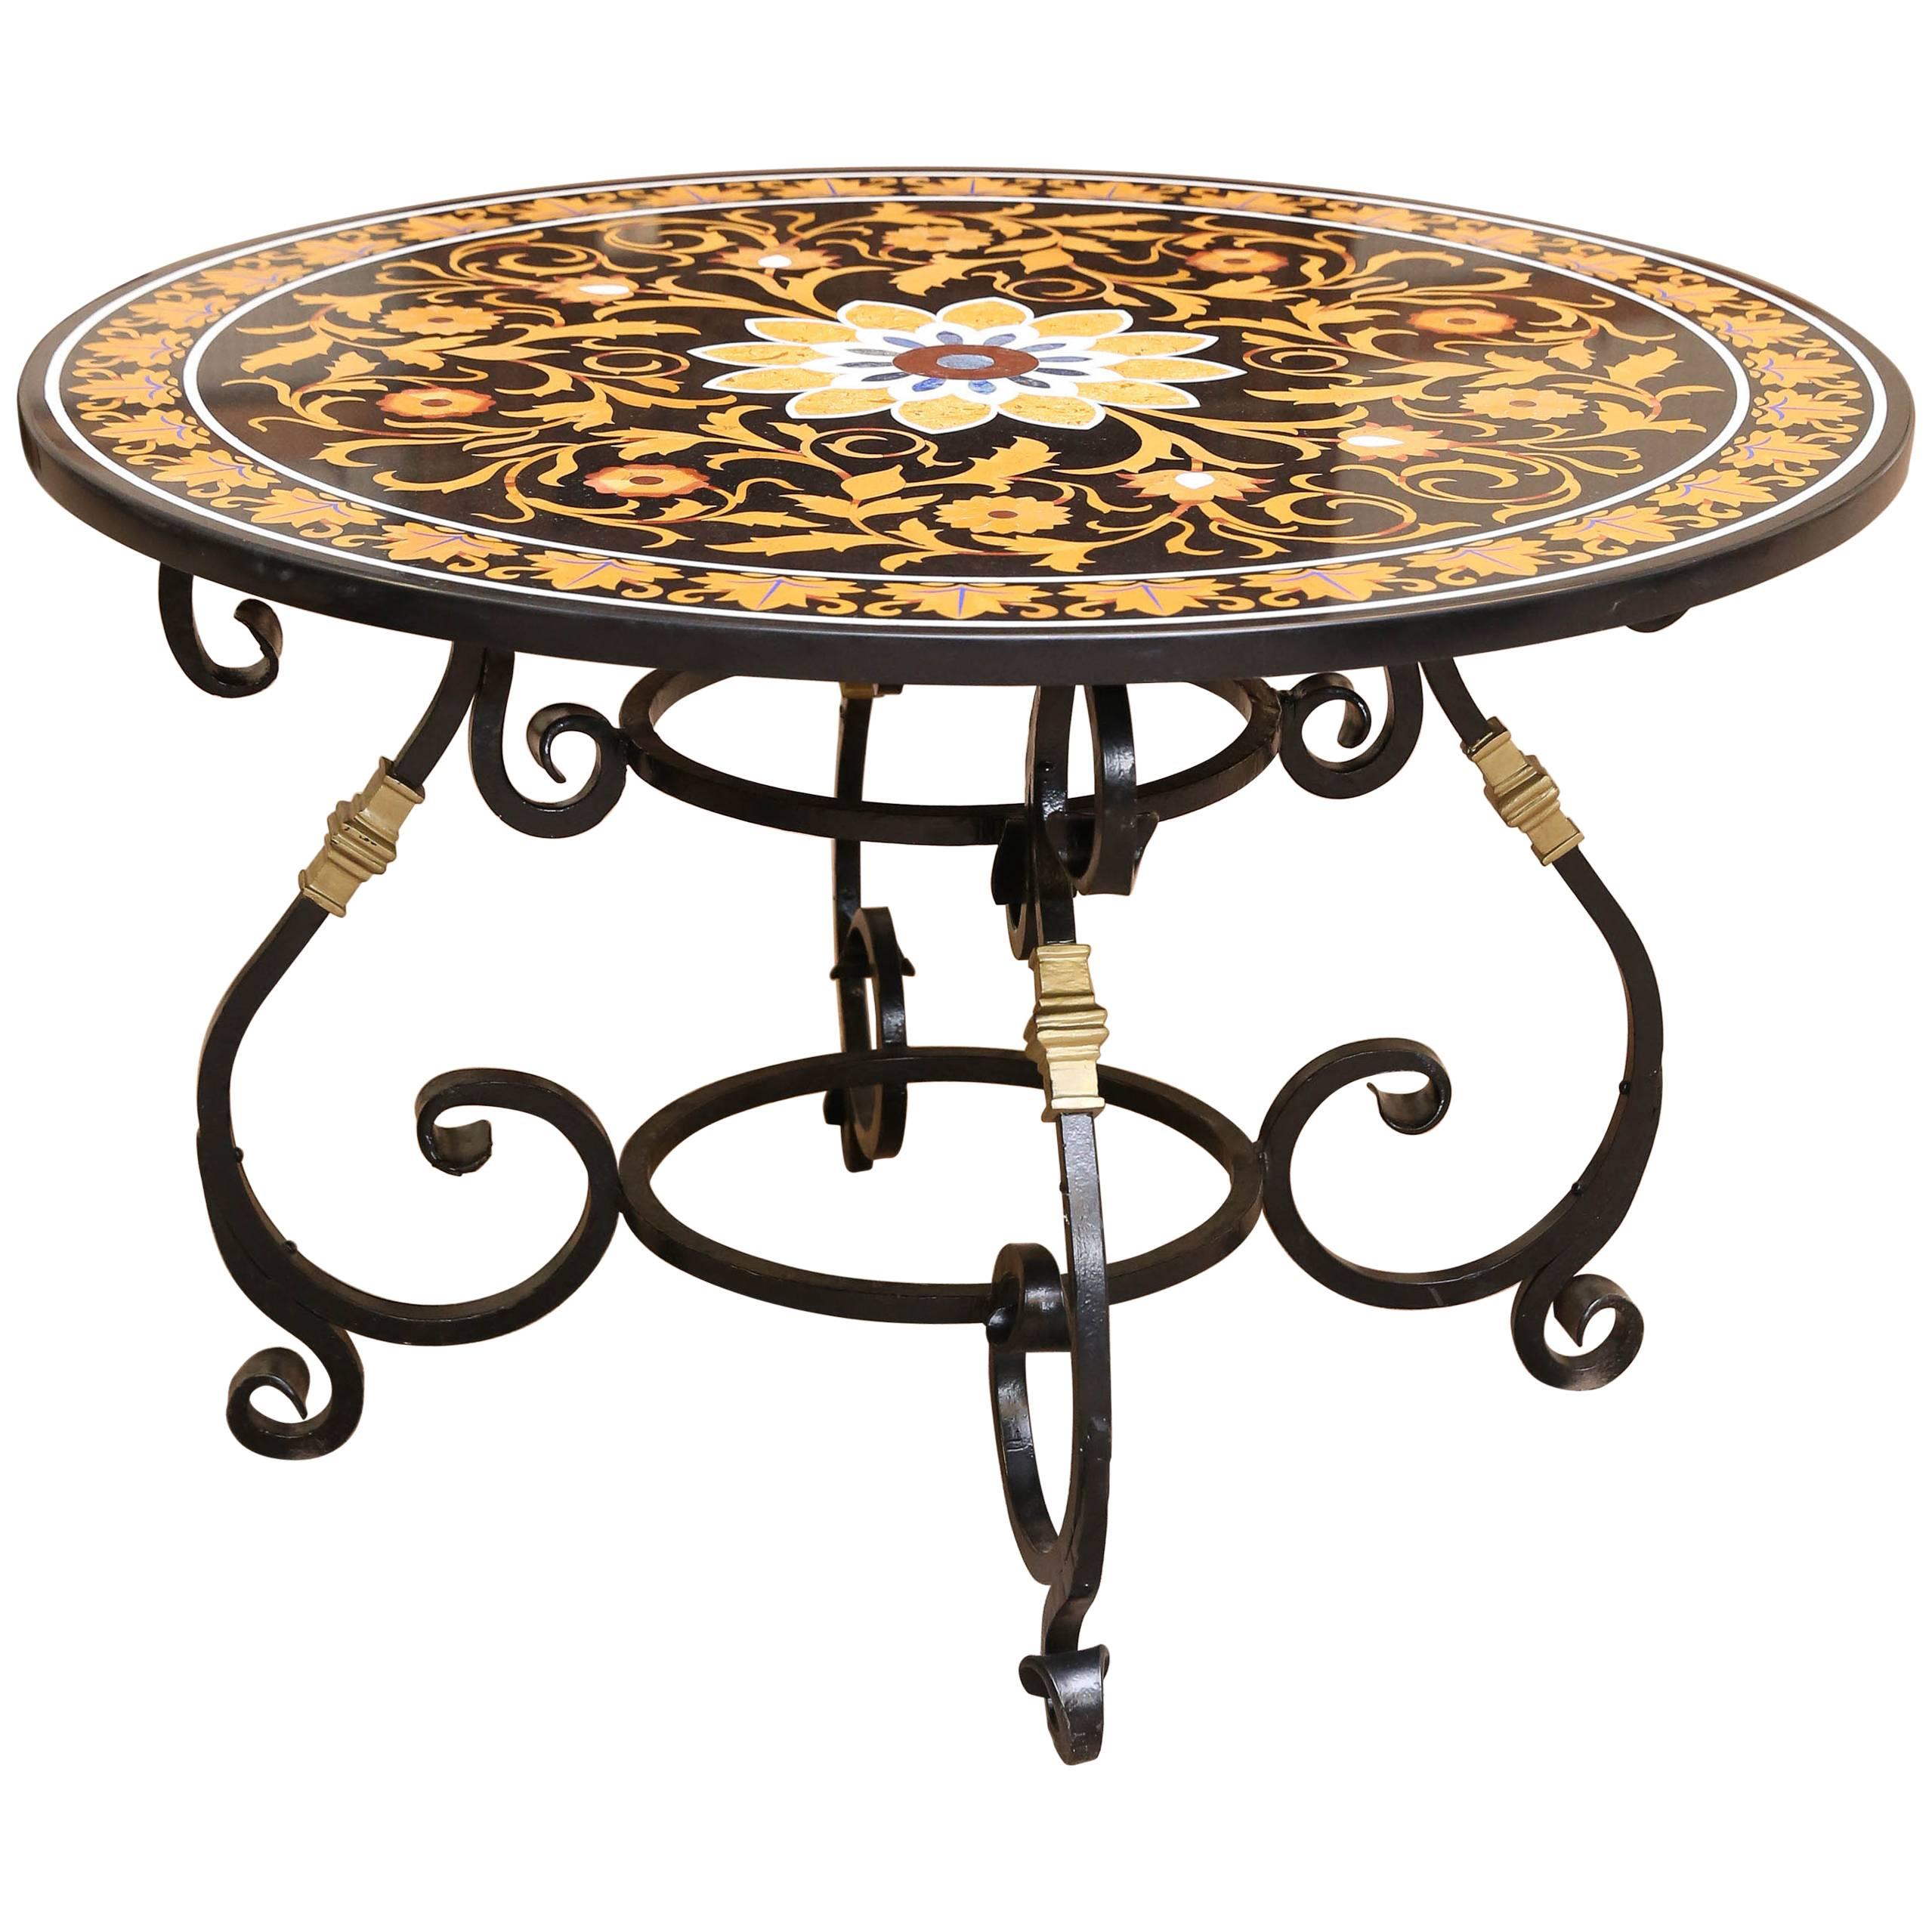 Midcentury Pietra-Dura Round Entry Table from Central India For Sale